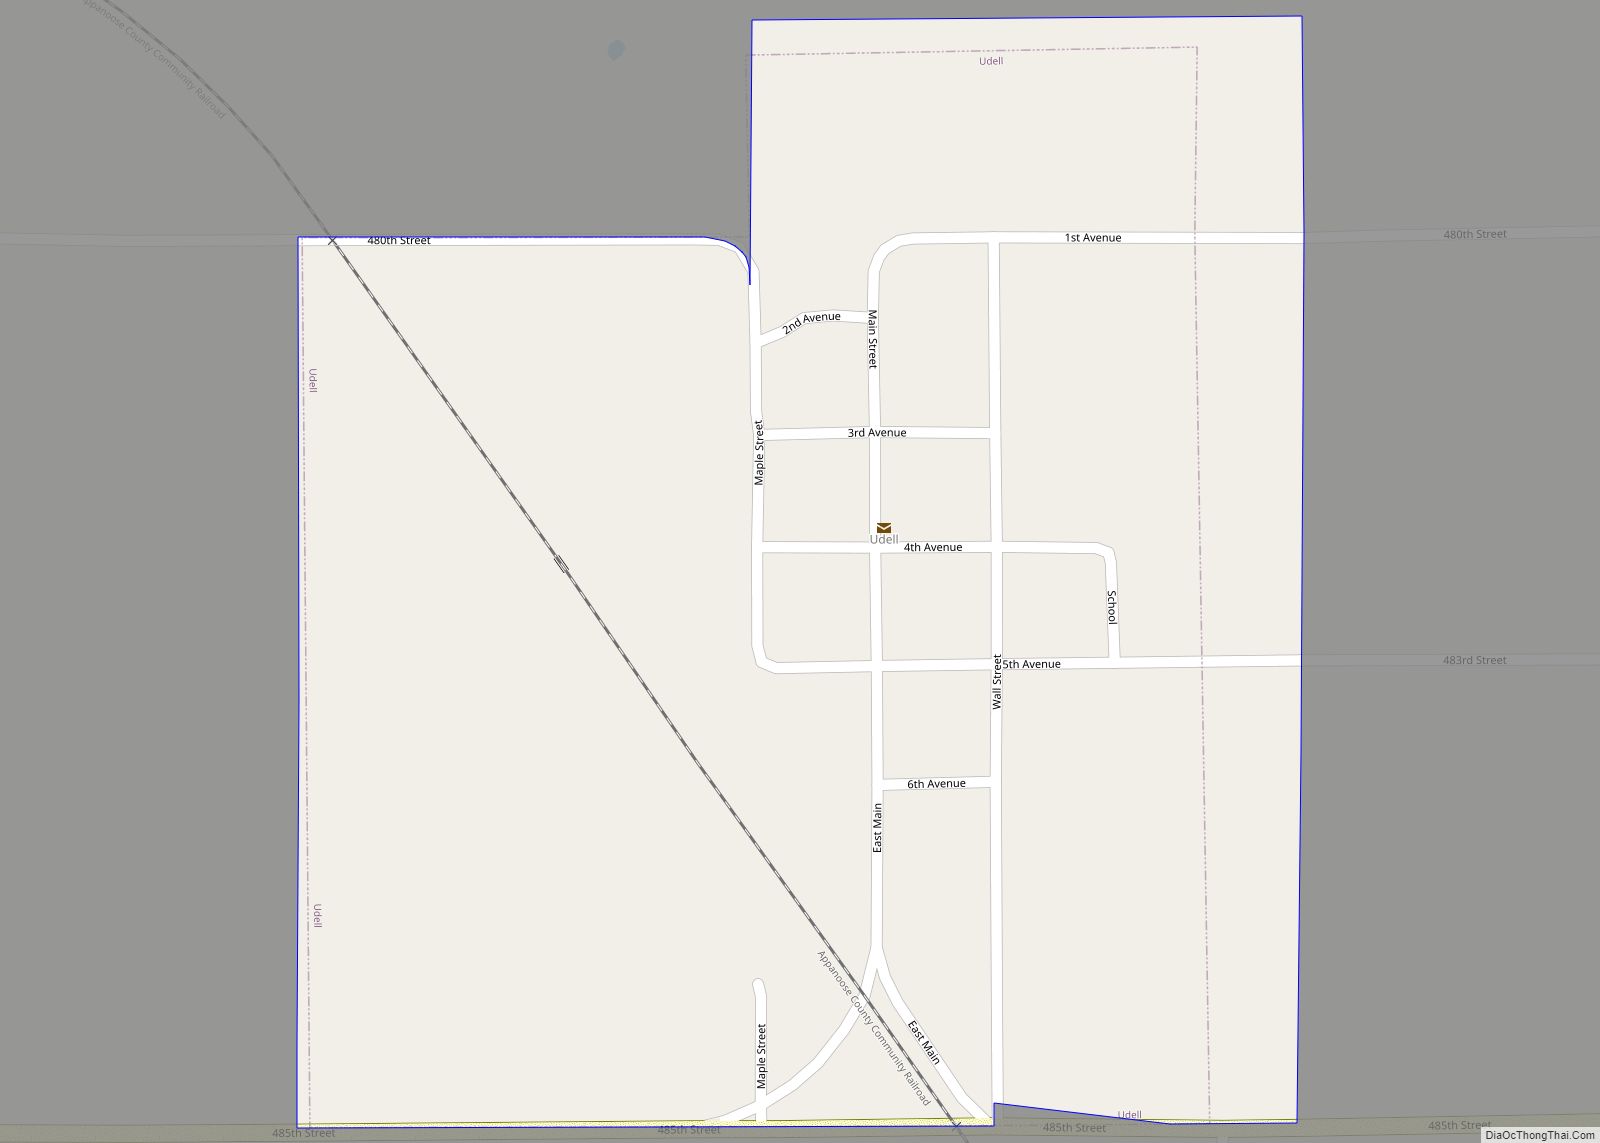 Map of Udell city